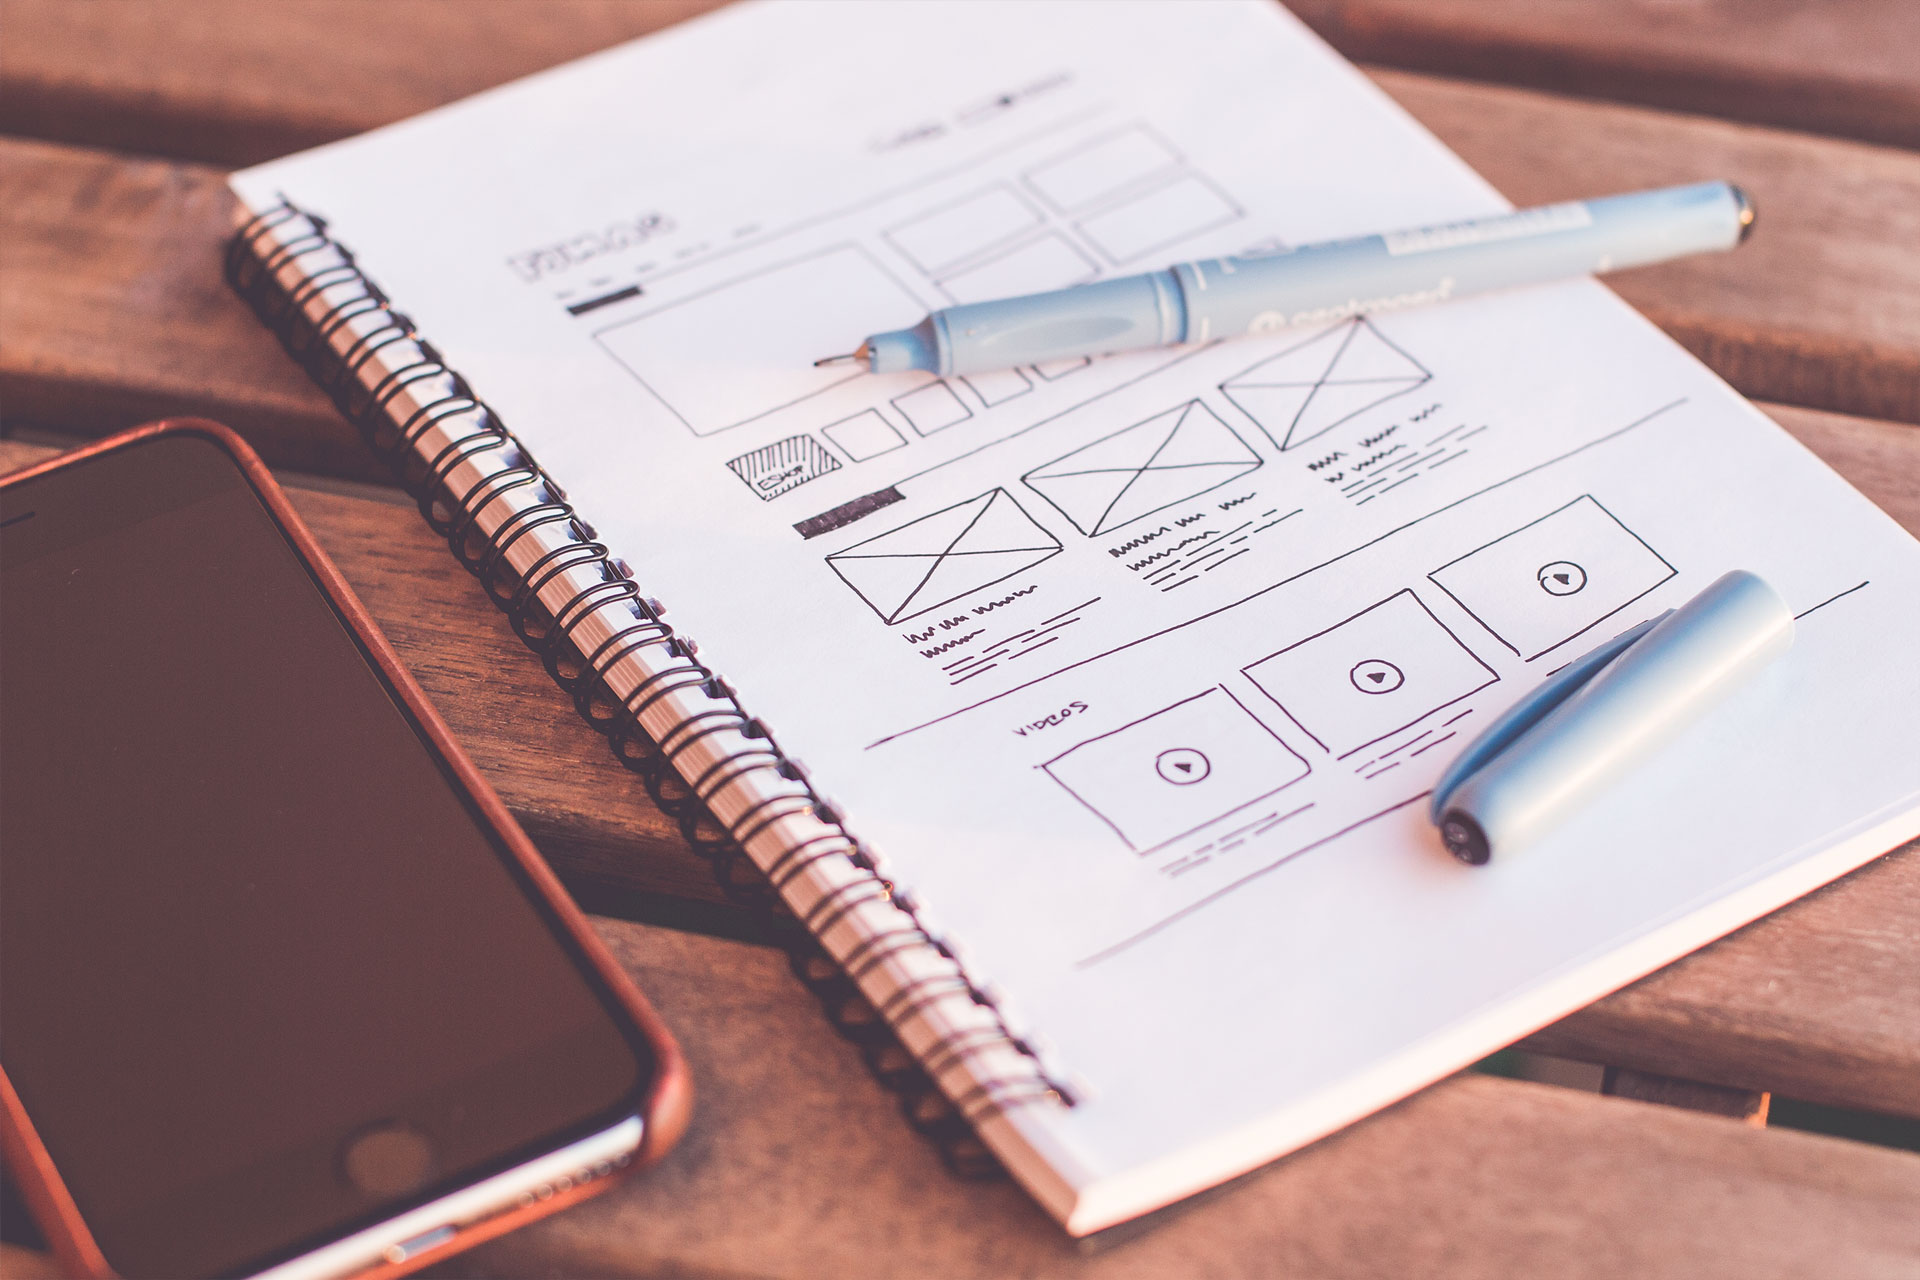 The Importance of UX Design